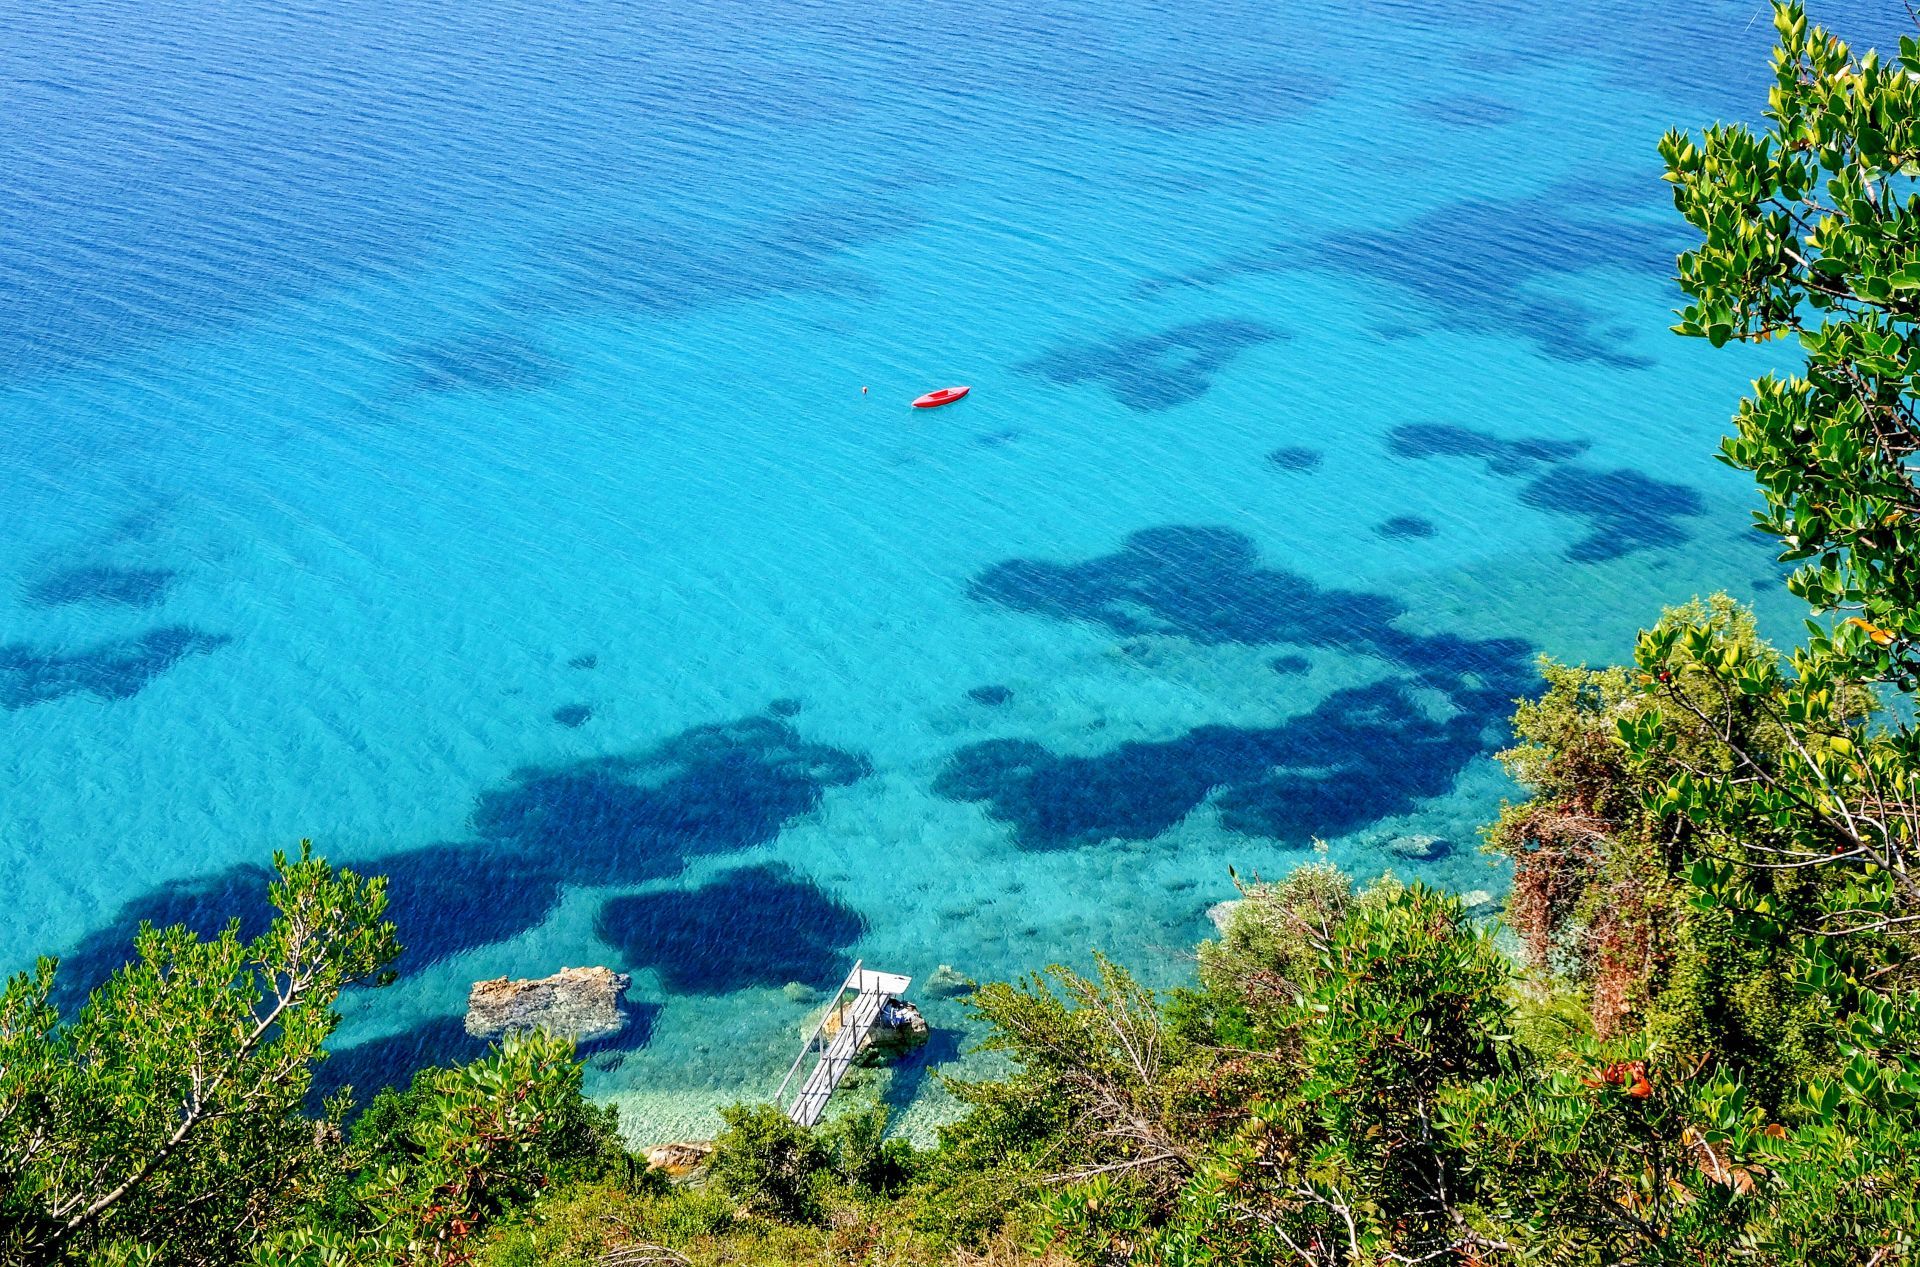 Sporades islands: The crystal clear waters of Alonissos island